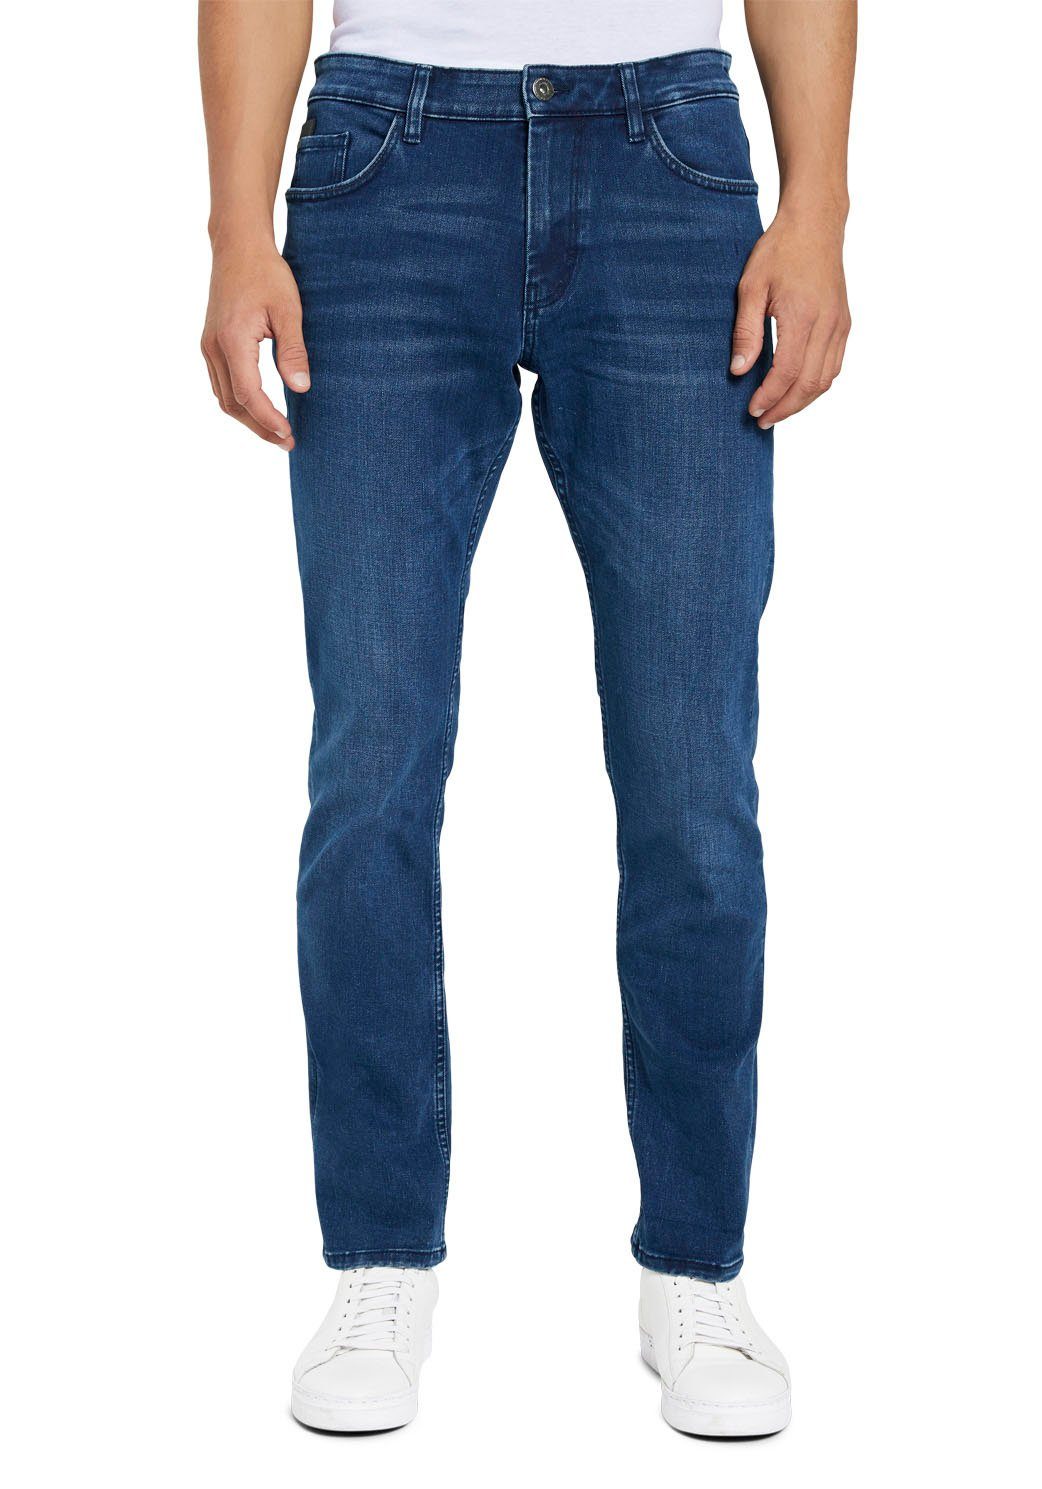 TOM TAILOR 5-Pocket-Jeans Josh in Used-Waschung